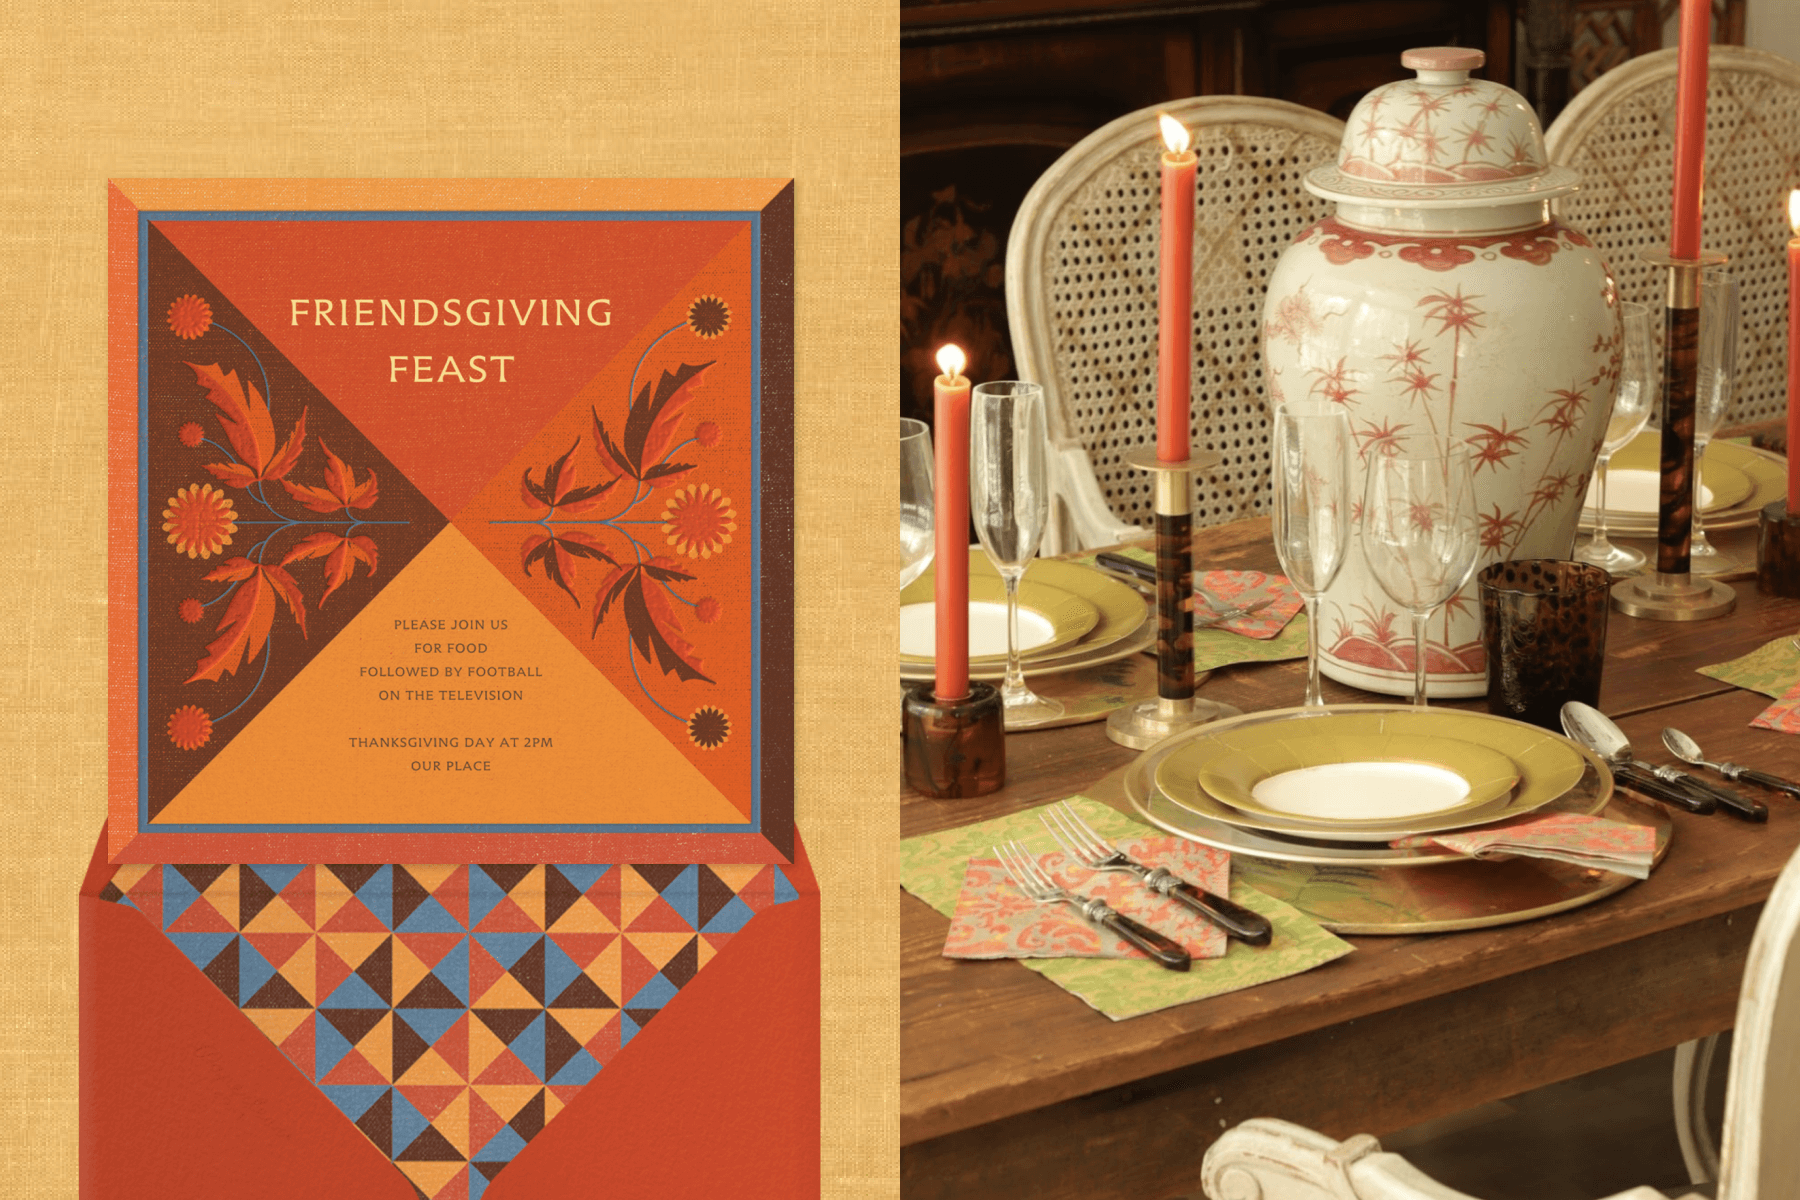 Left: An orange and brown Friendsgiving card with a floral and geometric motif; Right: A table setting with a cream and orange urn as a centerpiece and gold and coral accents.